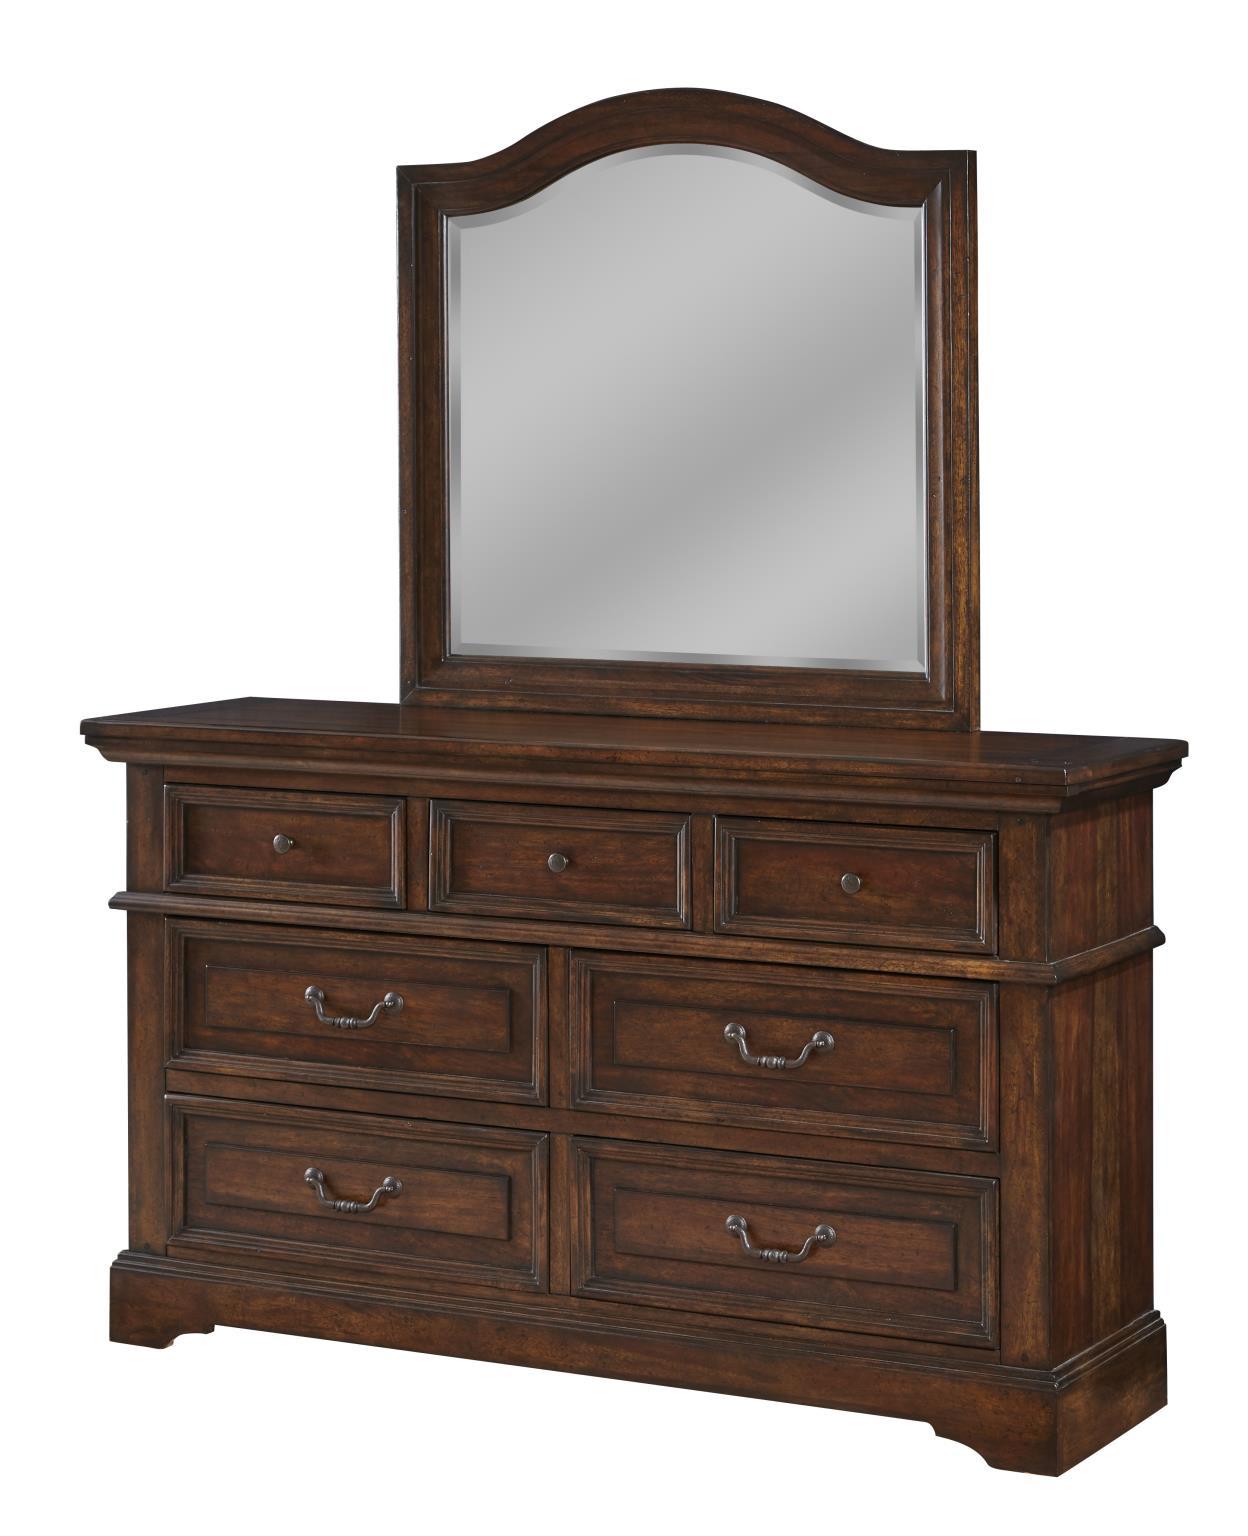 Classic, Traditional Dresser With Mirror 7800 STONEBROOK 7800-DLM in Tobacco 